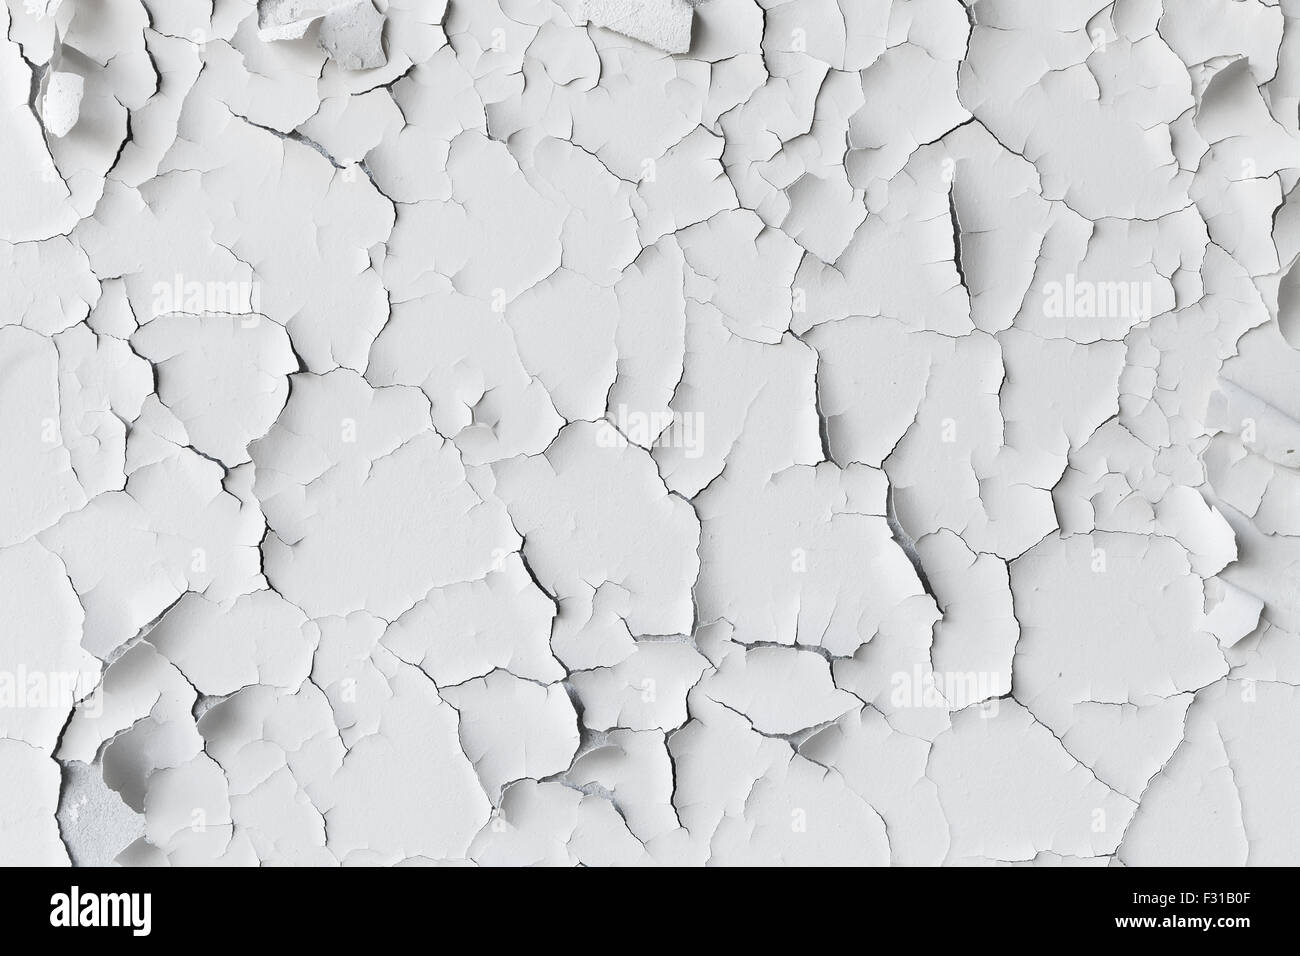 Cracked flaking white paint on the wall, background texture Stock Photo